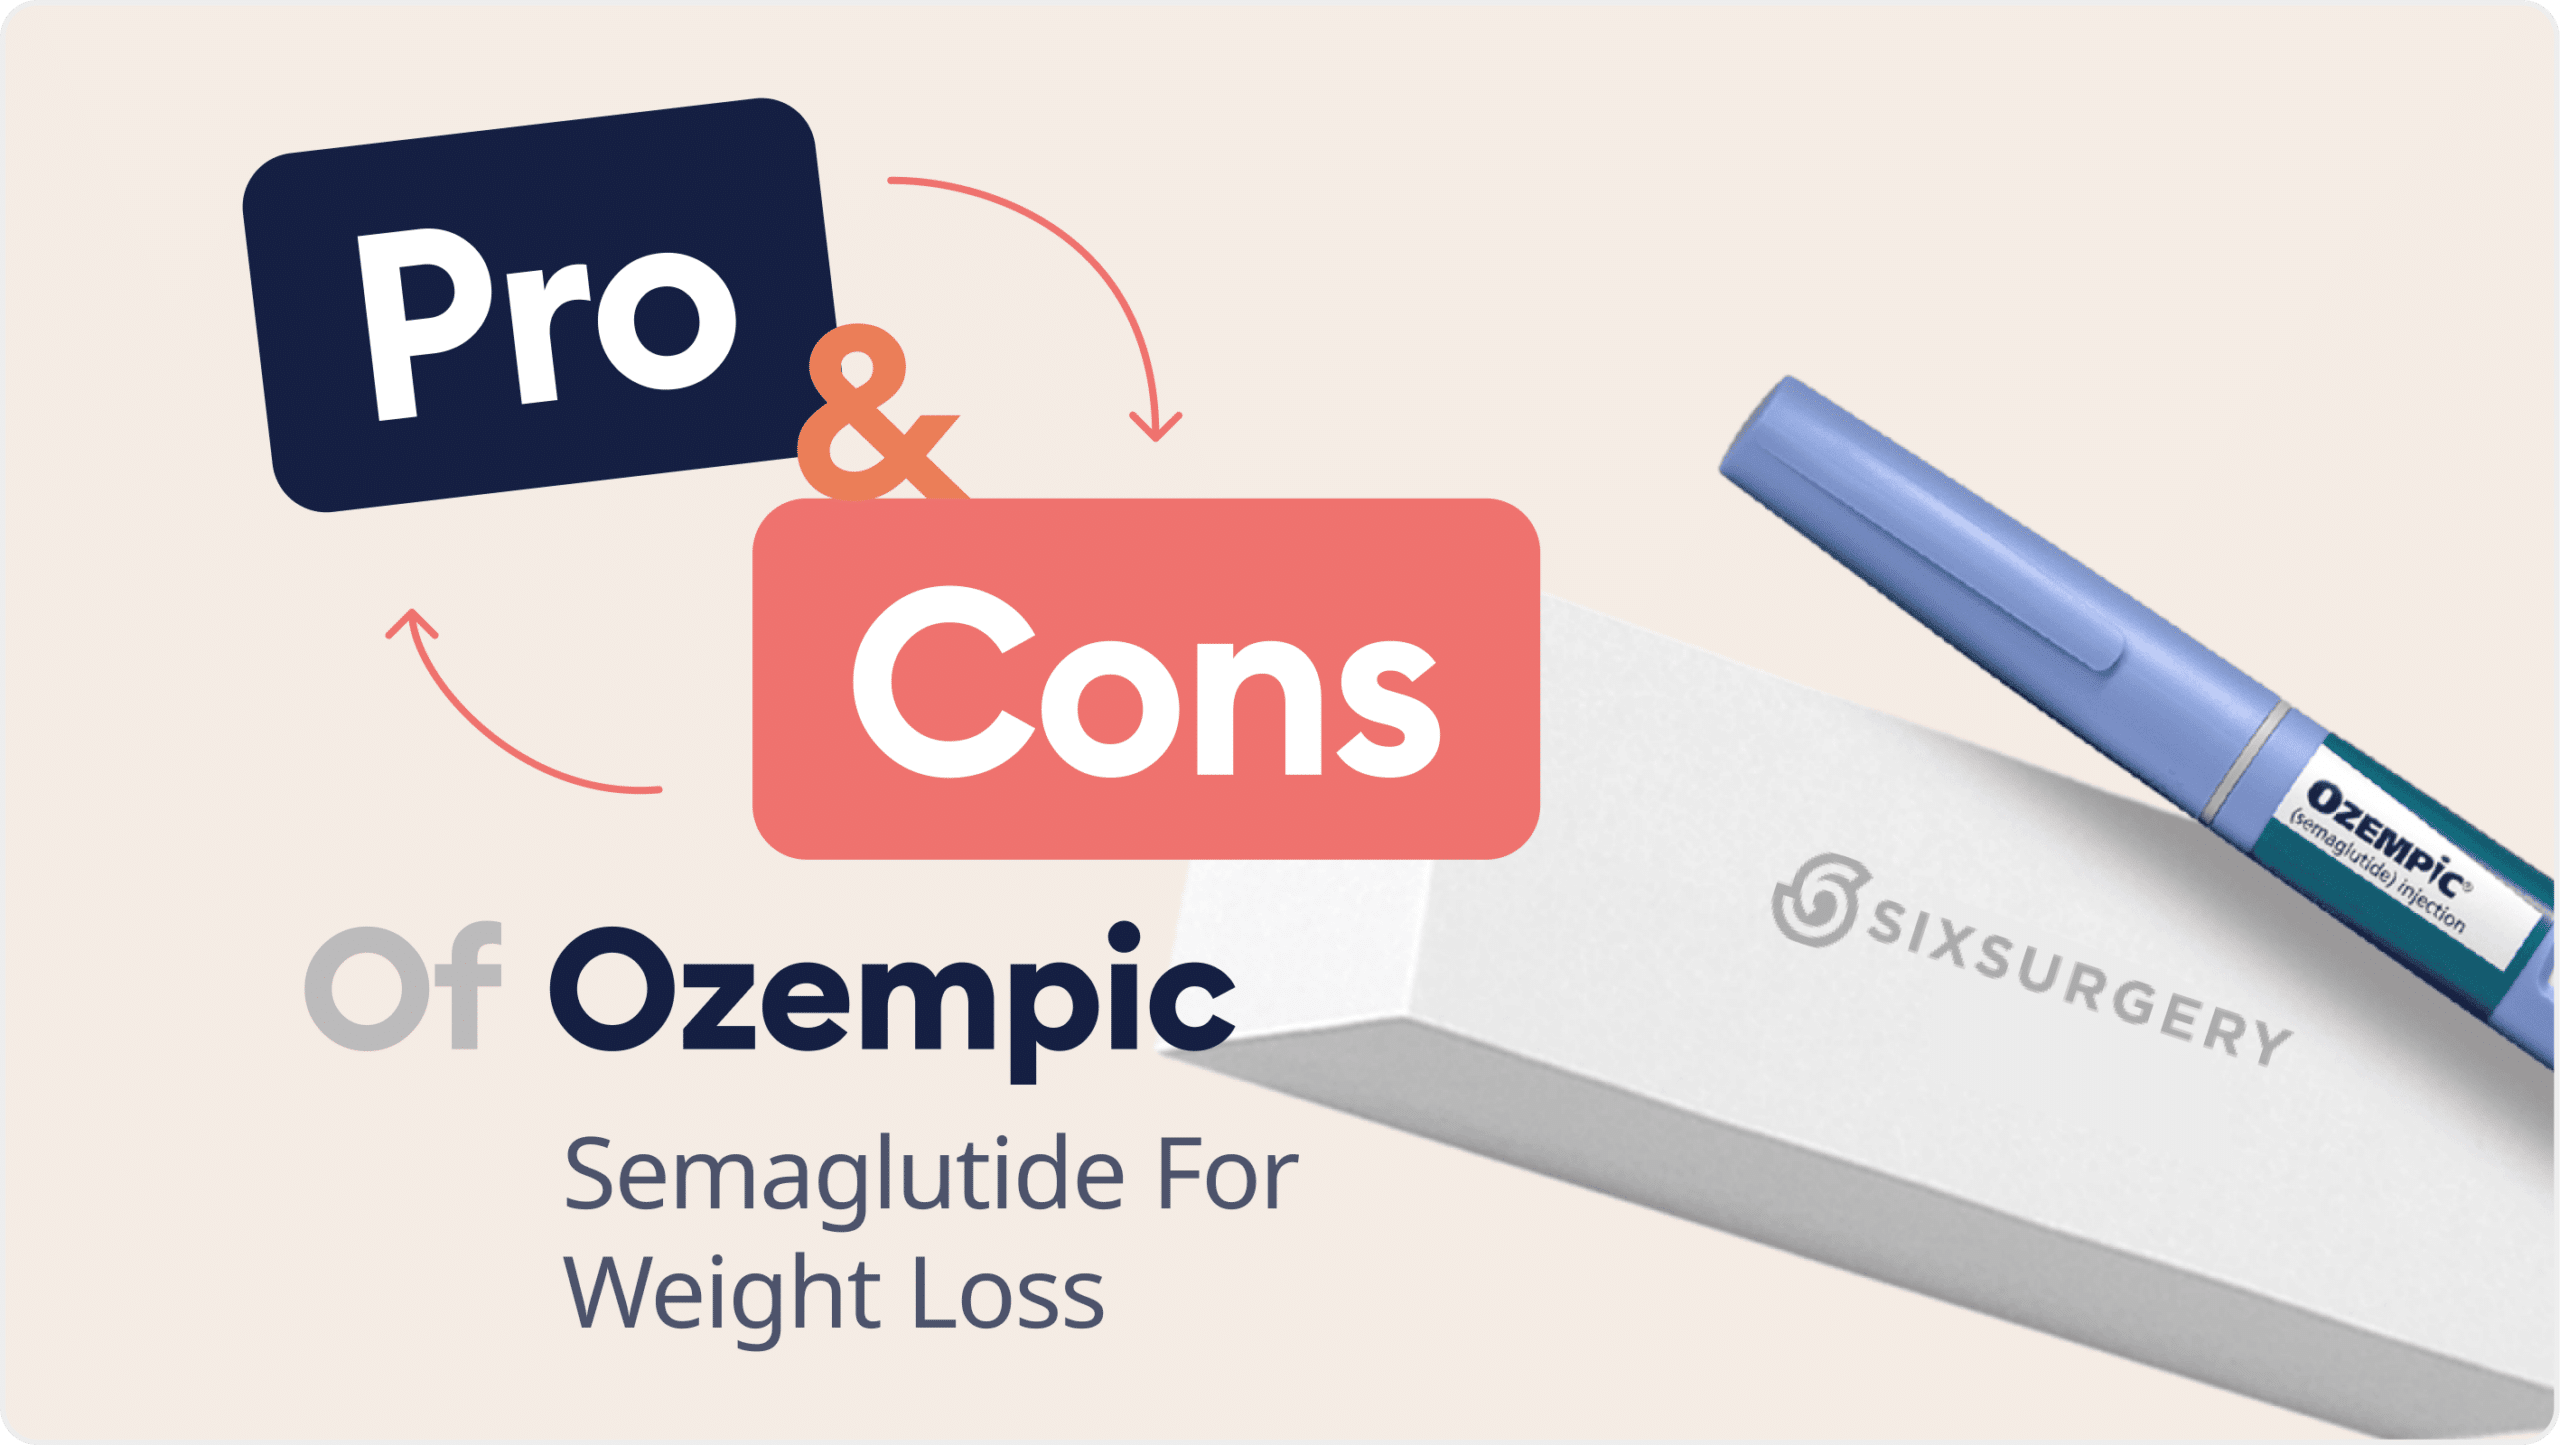 Pros and Cons of Ozempic Semaglutide